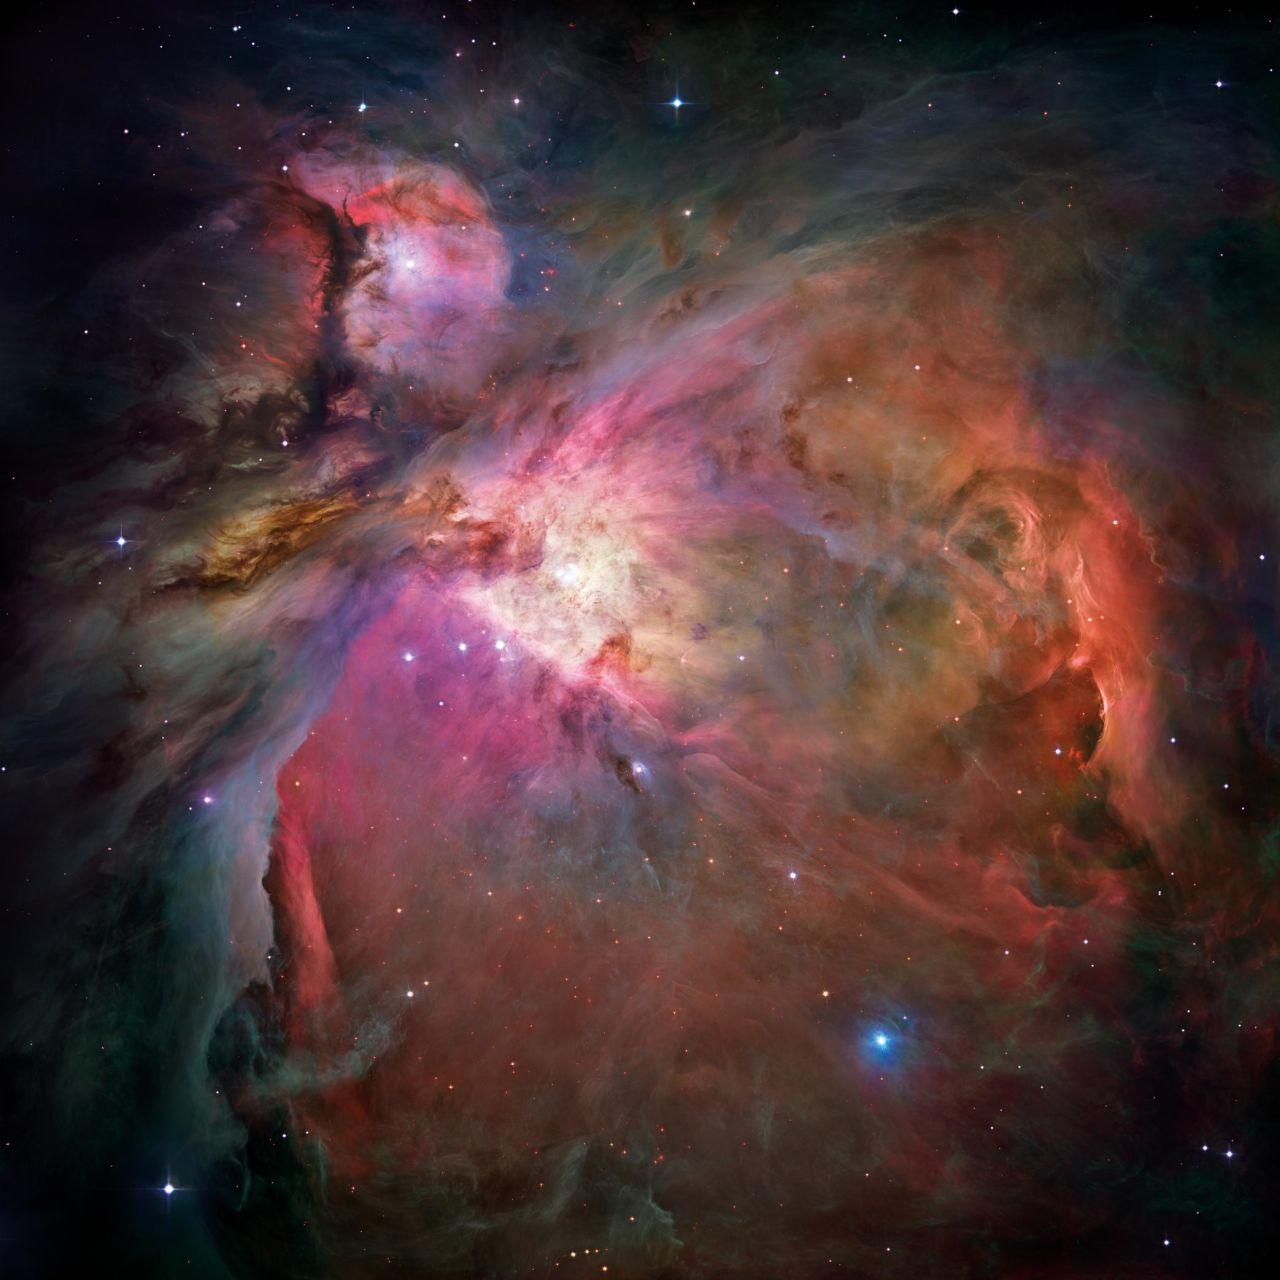 The Orion Nebula is 1,500 light-years from Earth and is located in<strong> </strong>Orion's Belt in the constellation Orion. It's one of the brightest nebulae -- and on a clear, dark night it's visible to the naked eye. The nebula is Earth's nearest star-forming region.